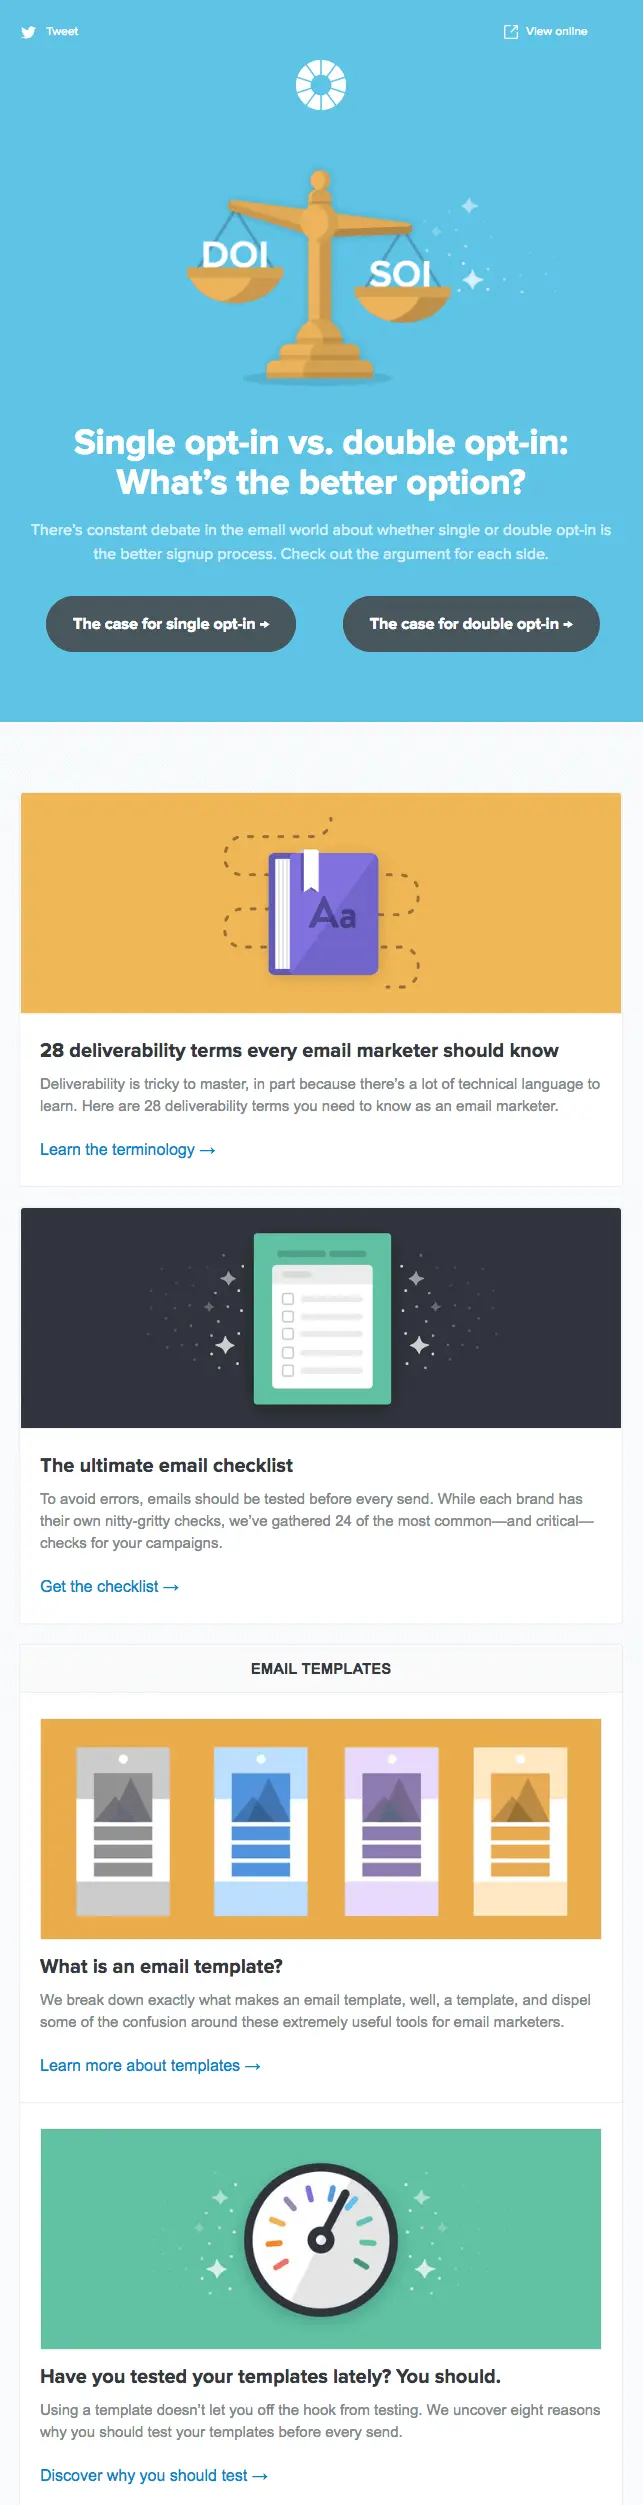 6 Tips for Choosing a Background for Your Email Newsletter - NEWOLDSTAMP